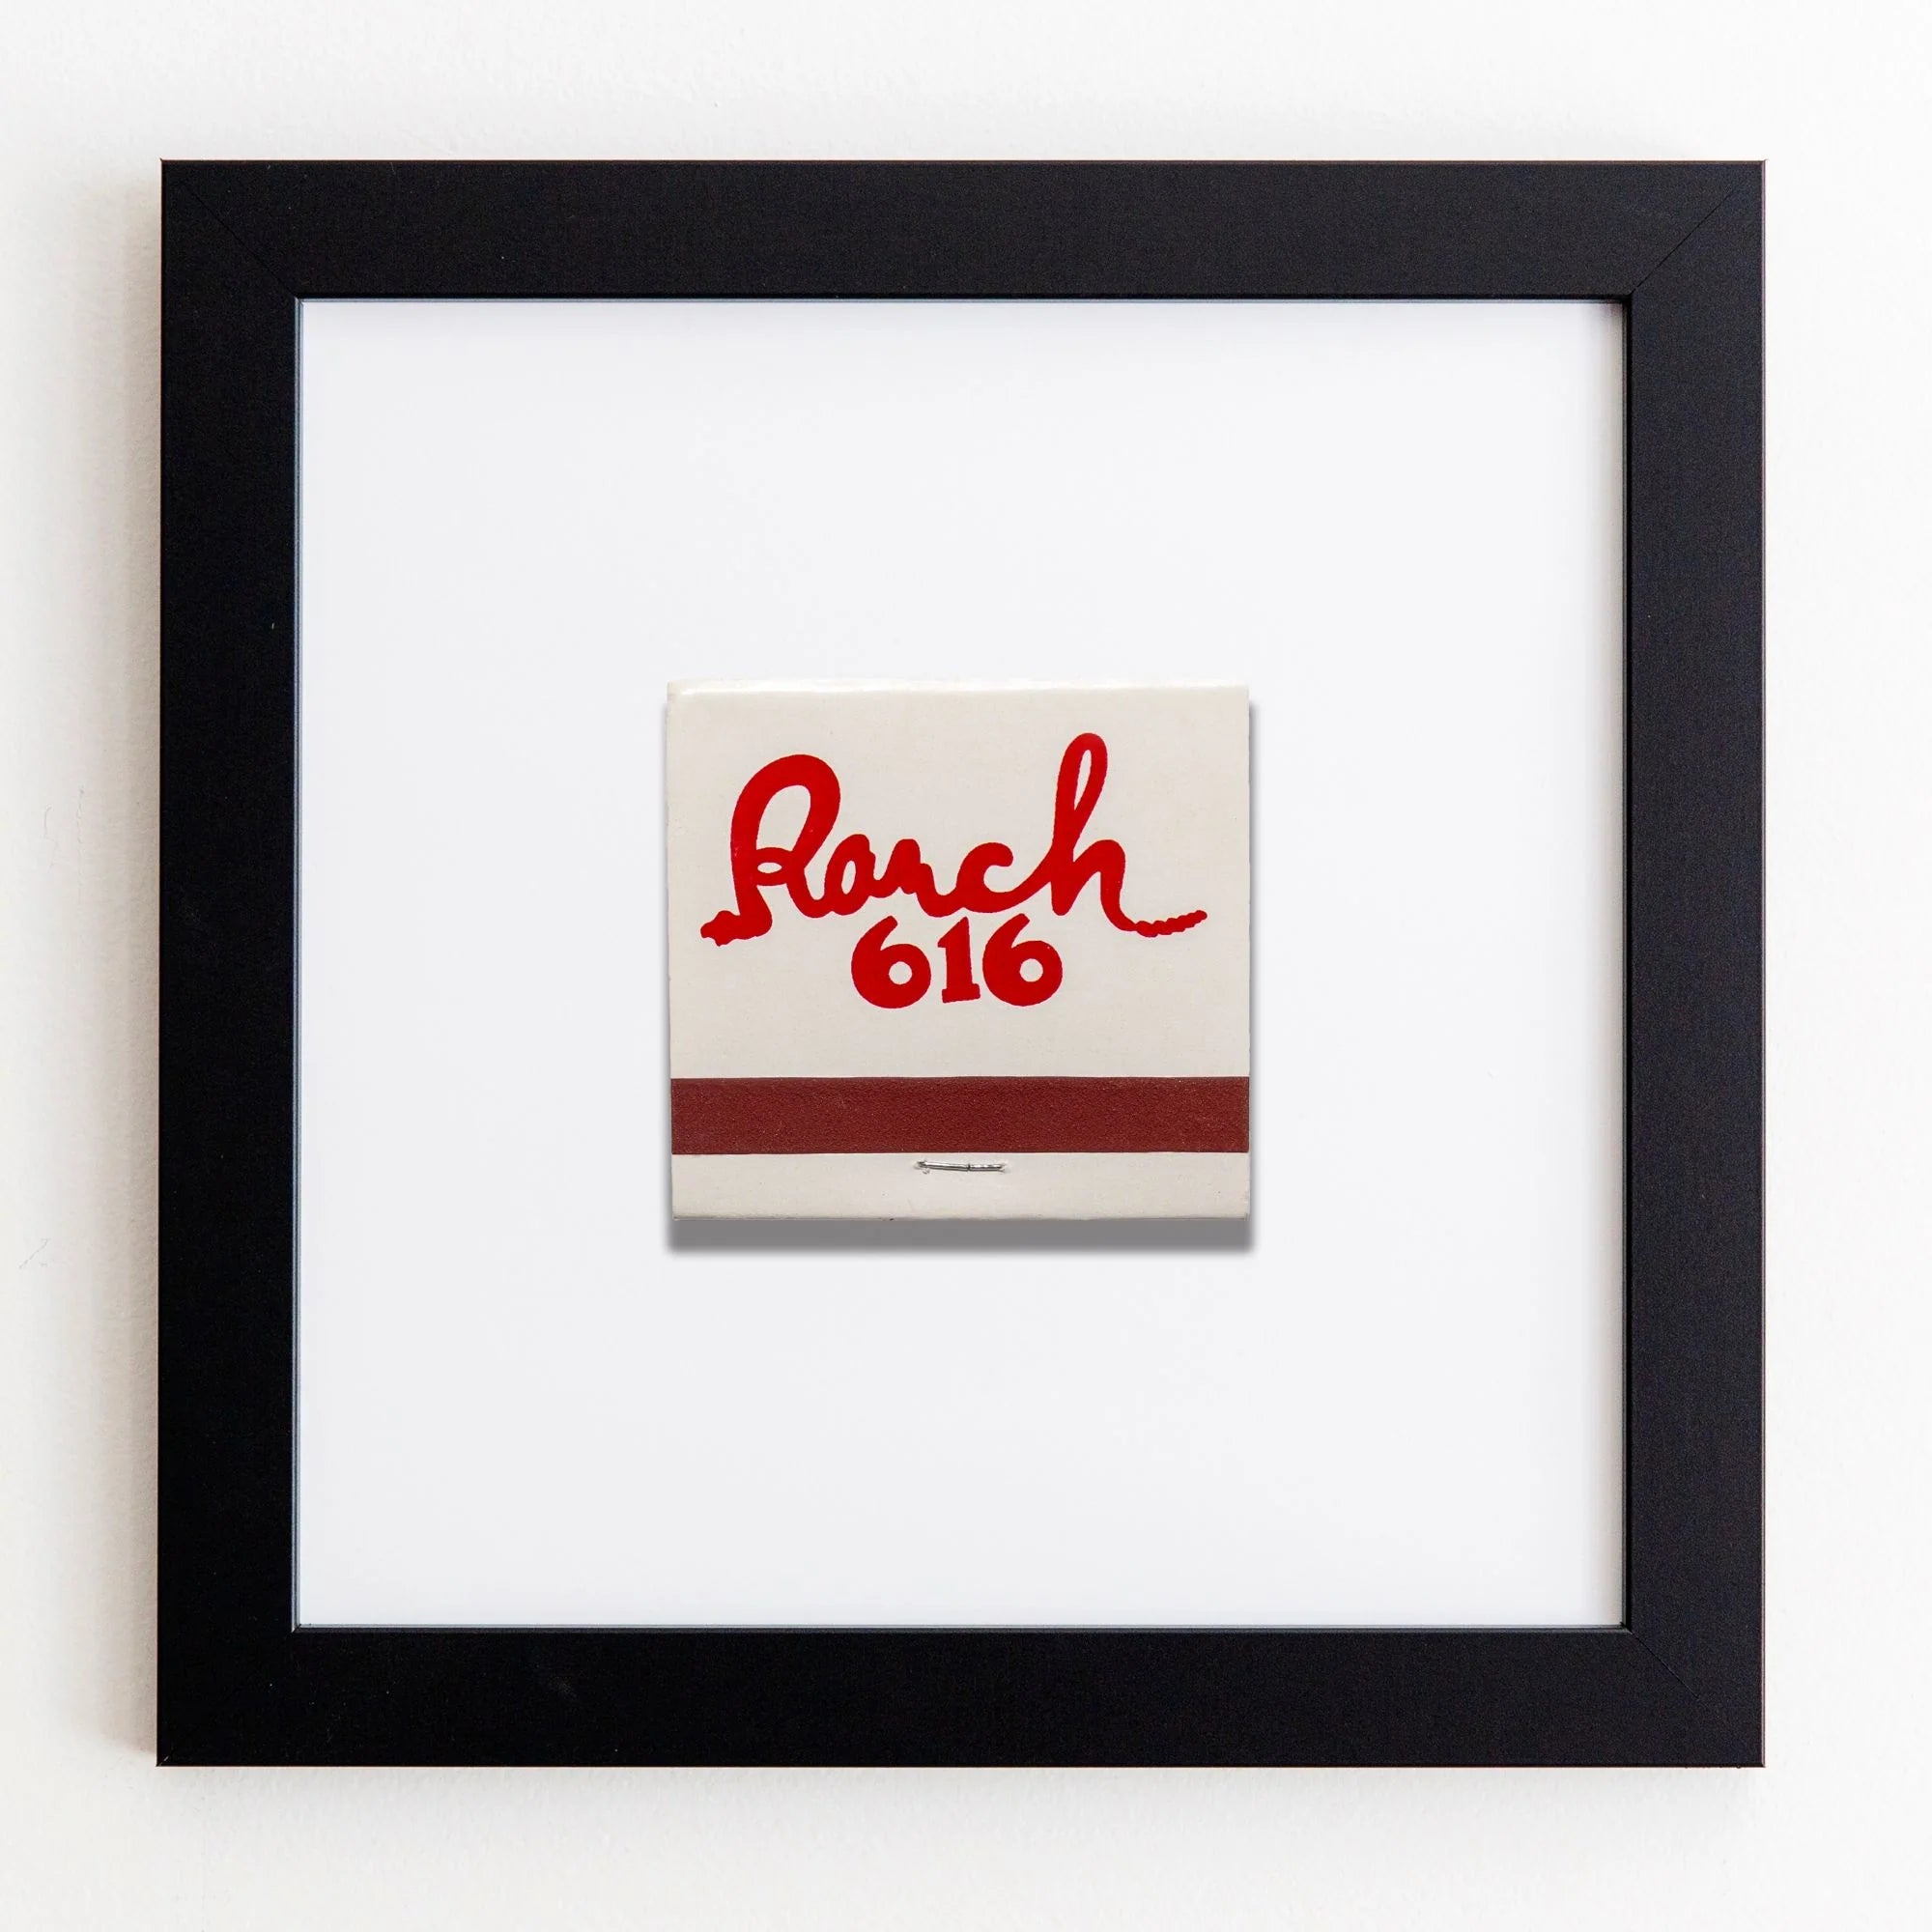 A square ceramic tile with &quot;Roach 616&quot; handwritten in red, framed in a Match South Art Square Black Frame against a white background.